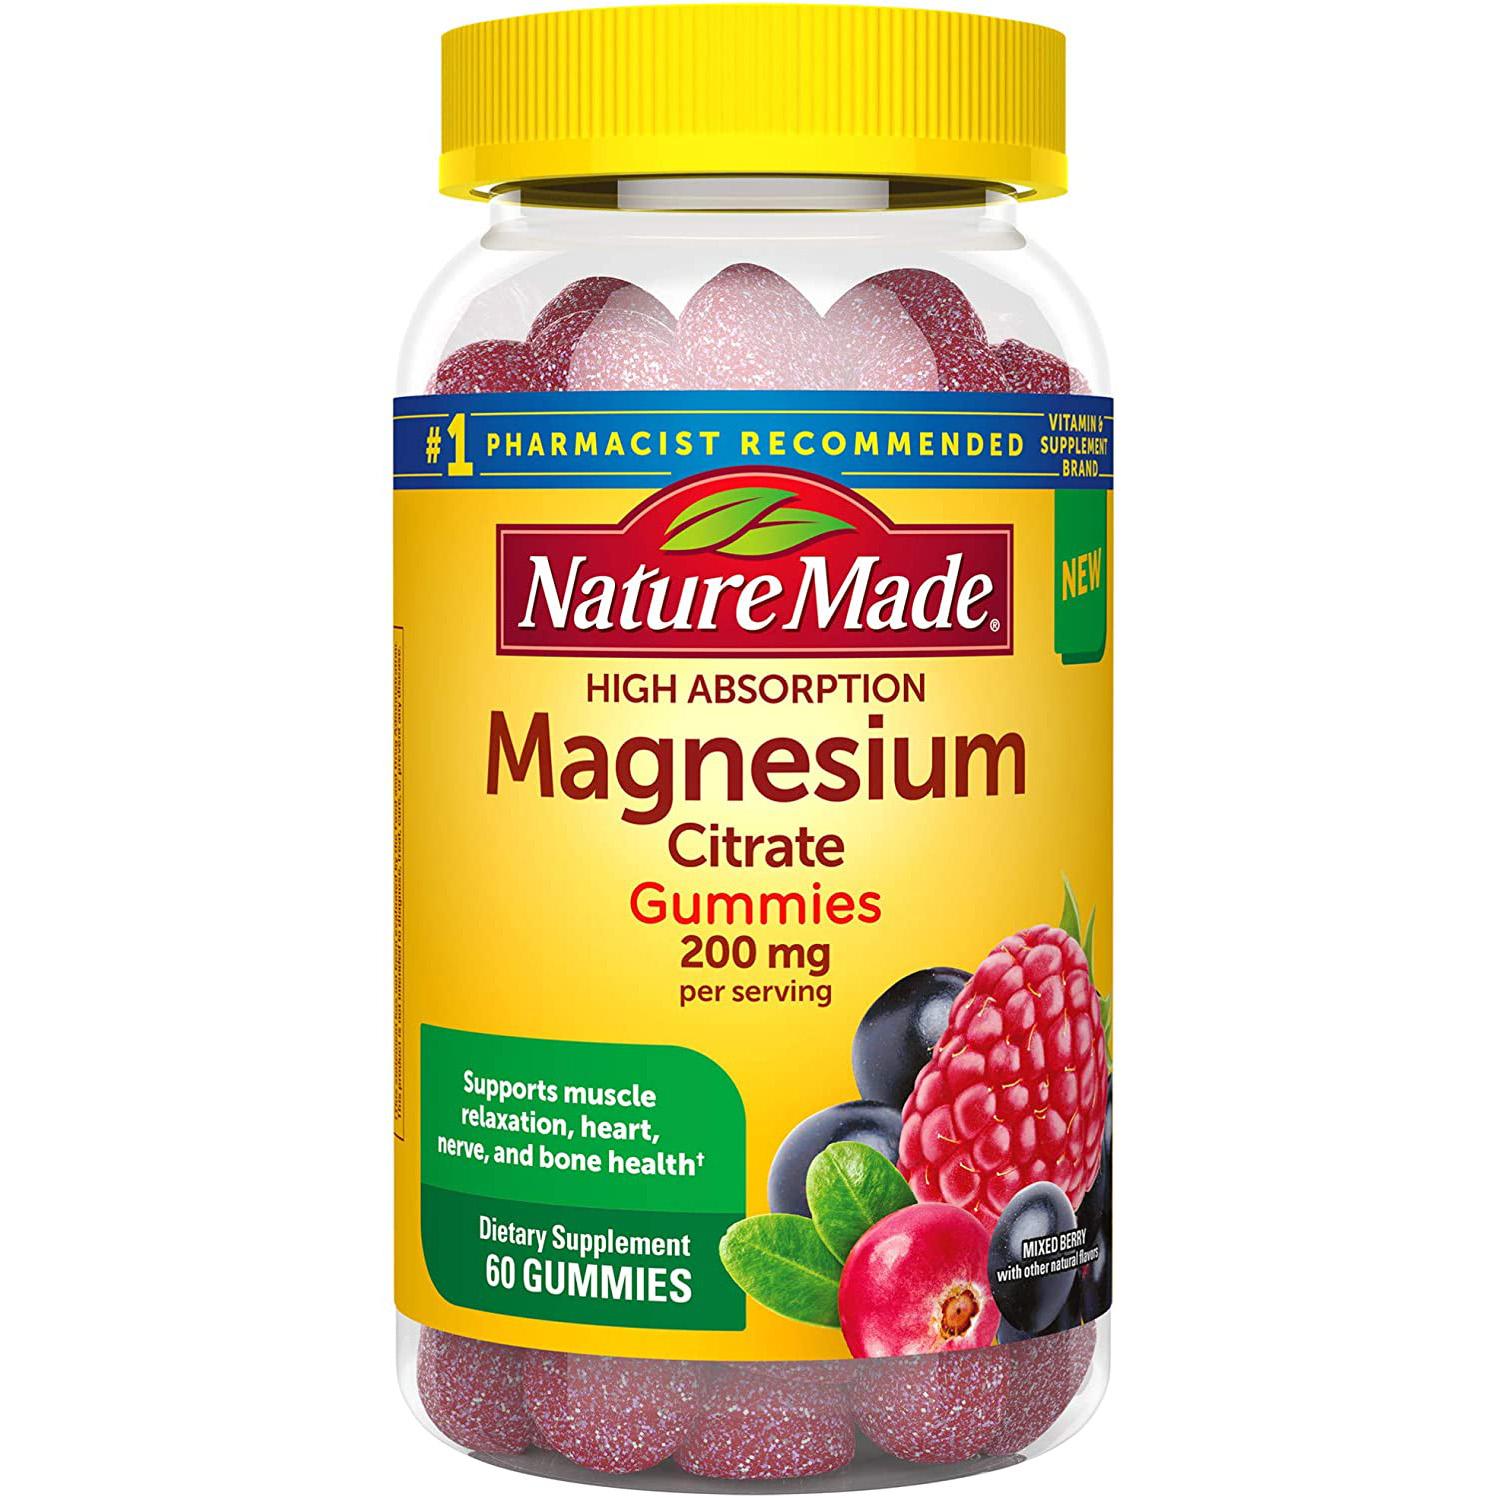 Nature Made High Absorption Magnesium Citrate Gummies for $9.36